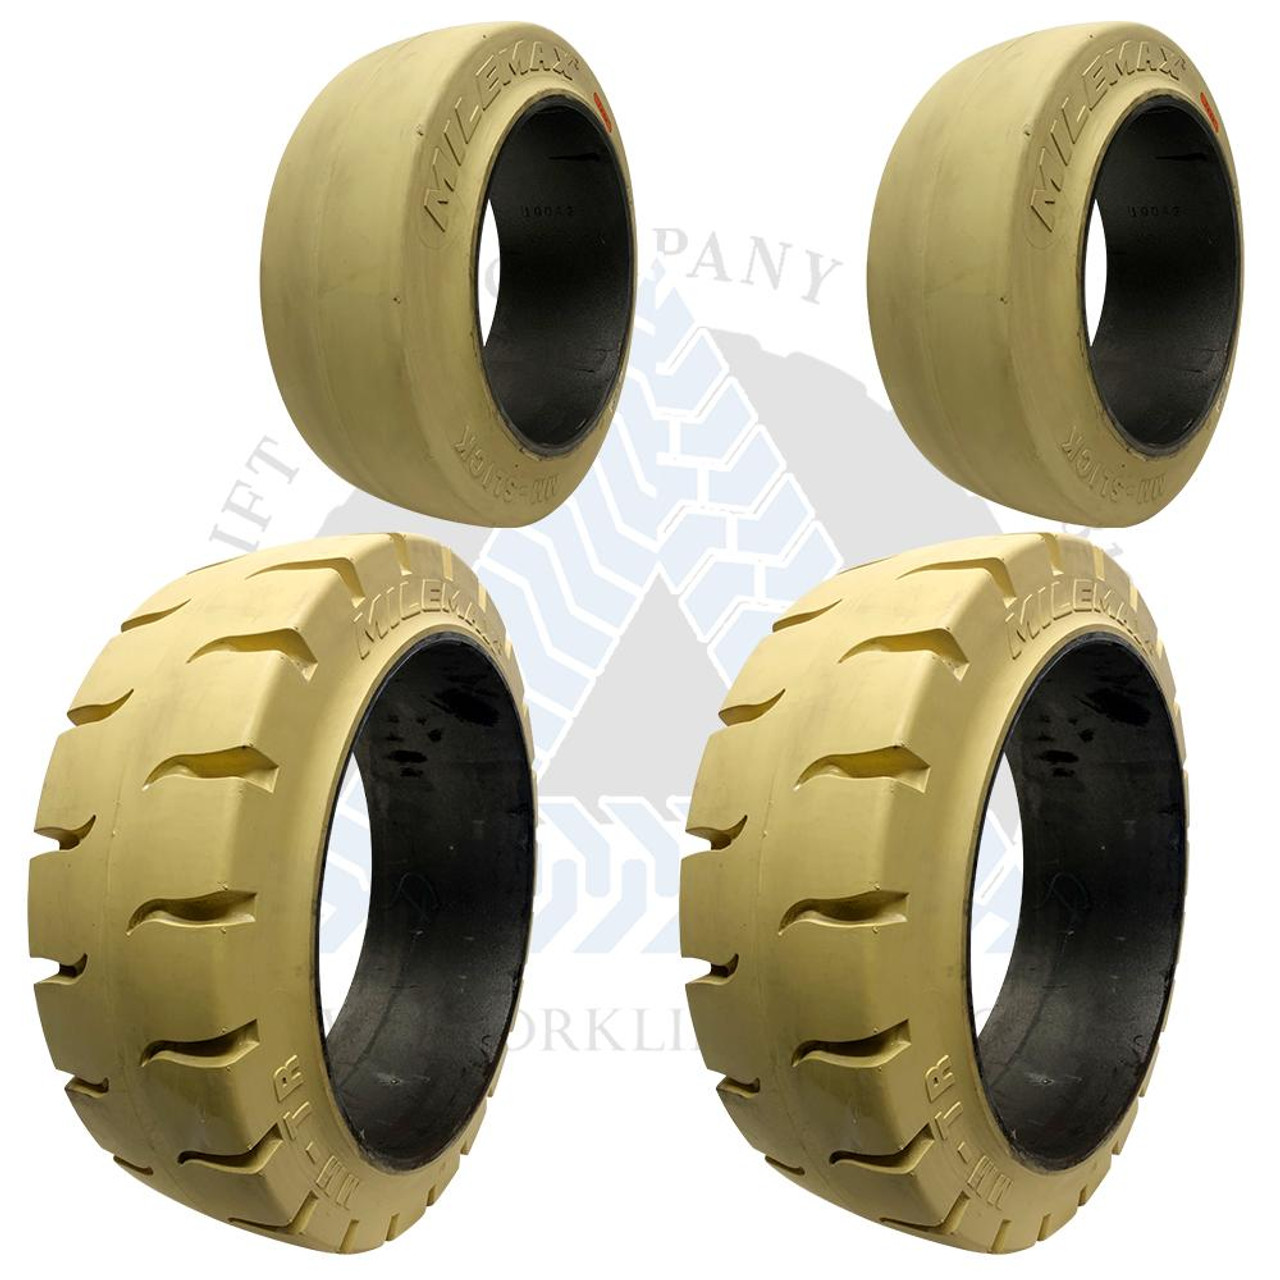 Order 18x7x12-1/8 and 14x4-1/2x8 Solid Non Marking Tires 4x deal